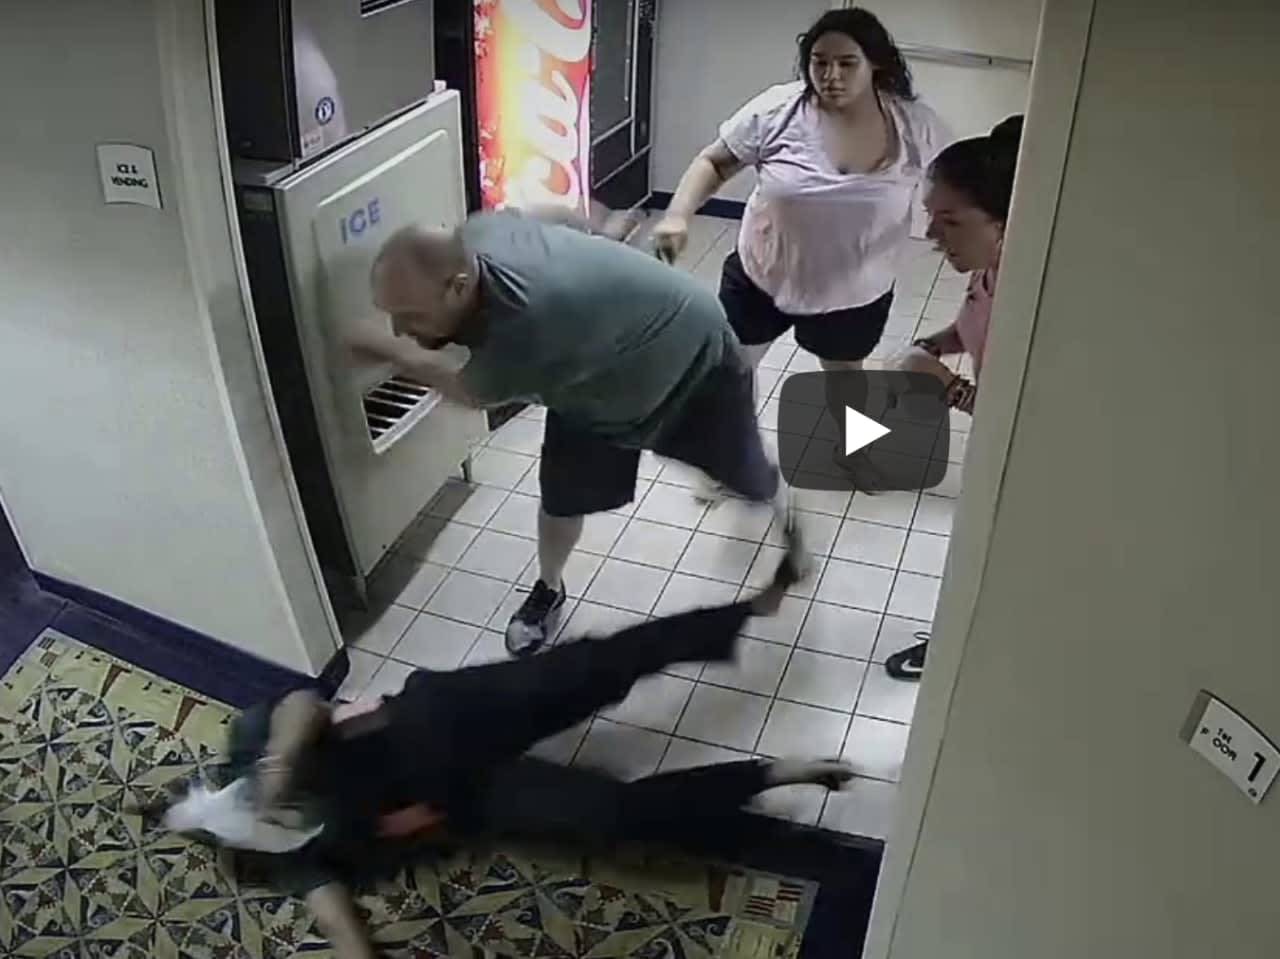 This surveillance video still shows the attack on 59-year-old Crystal Caldwell of Groton.